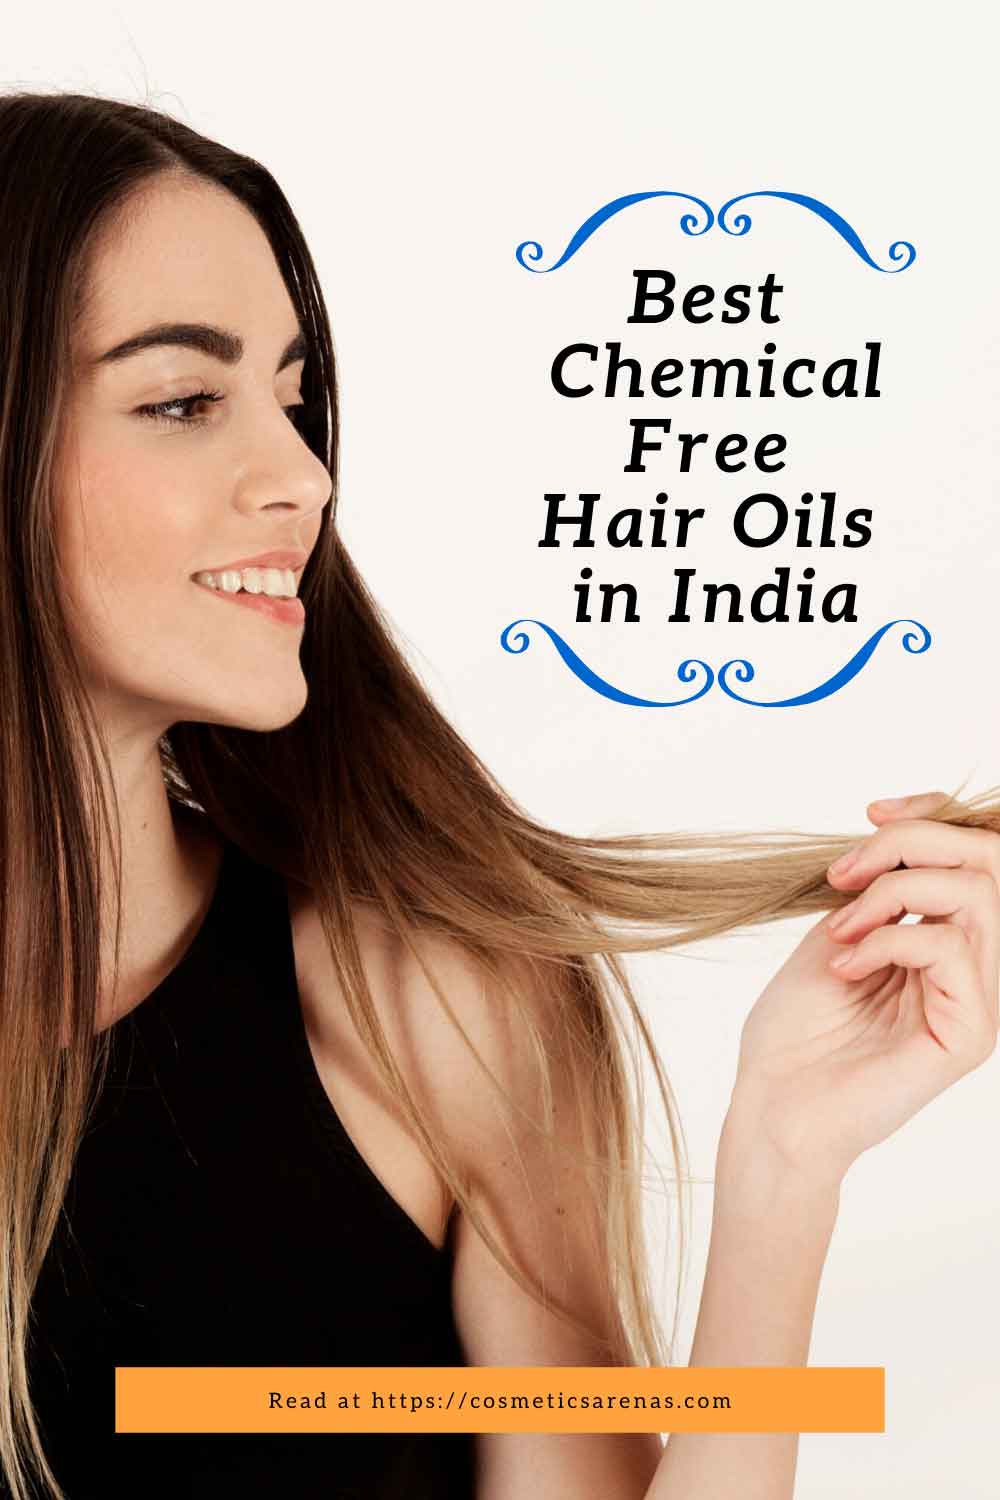 9 Best Chemical Free Hair Oils in India for Healthy Mane